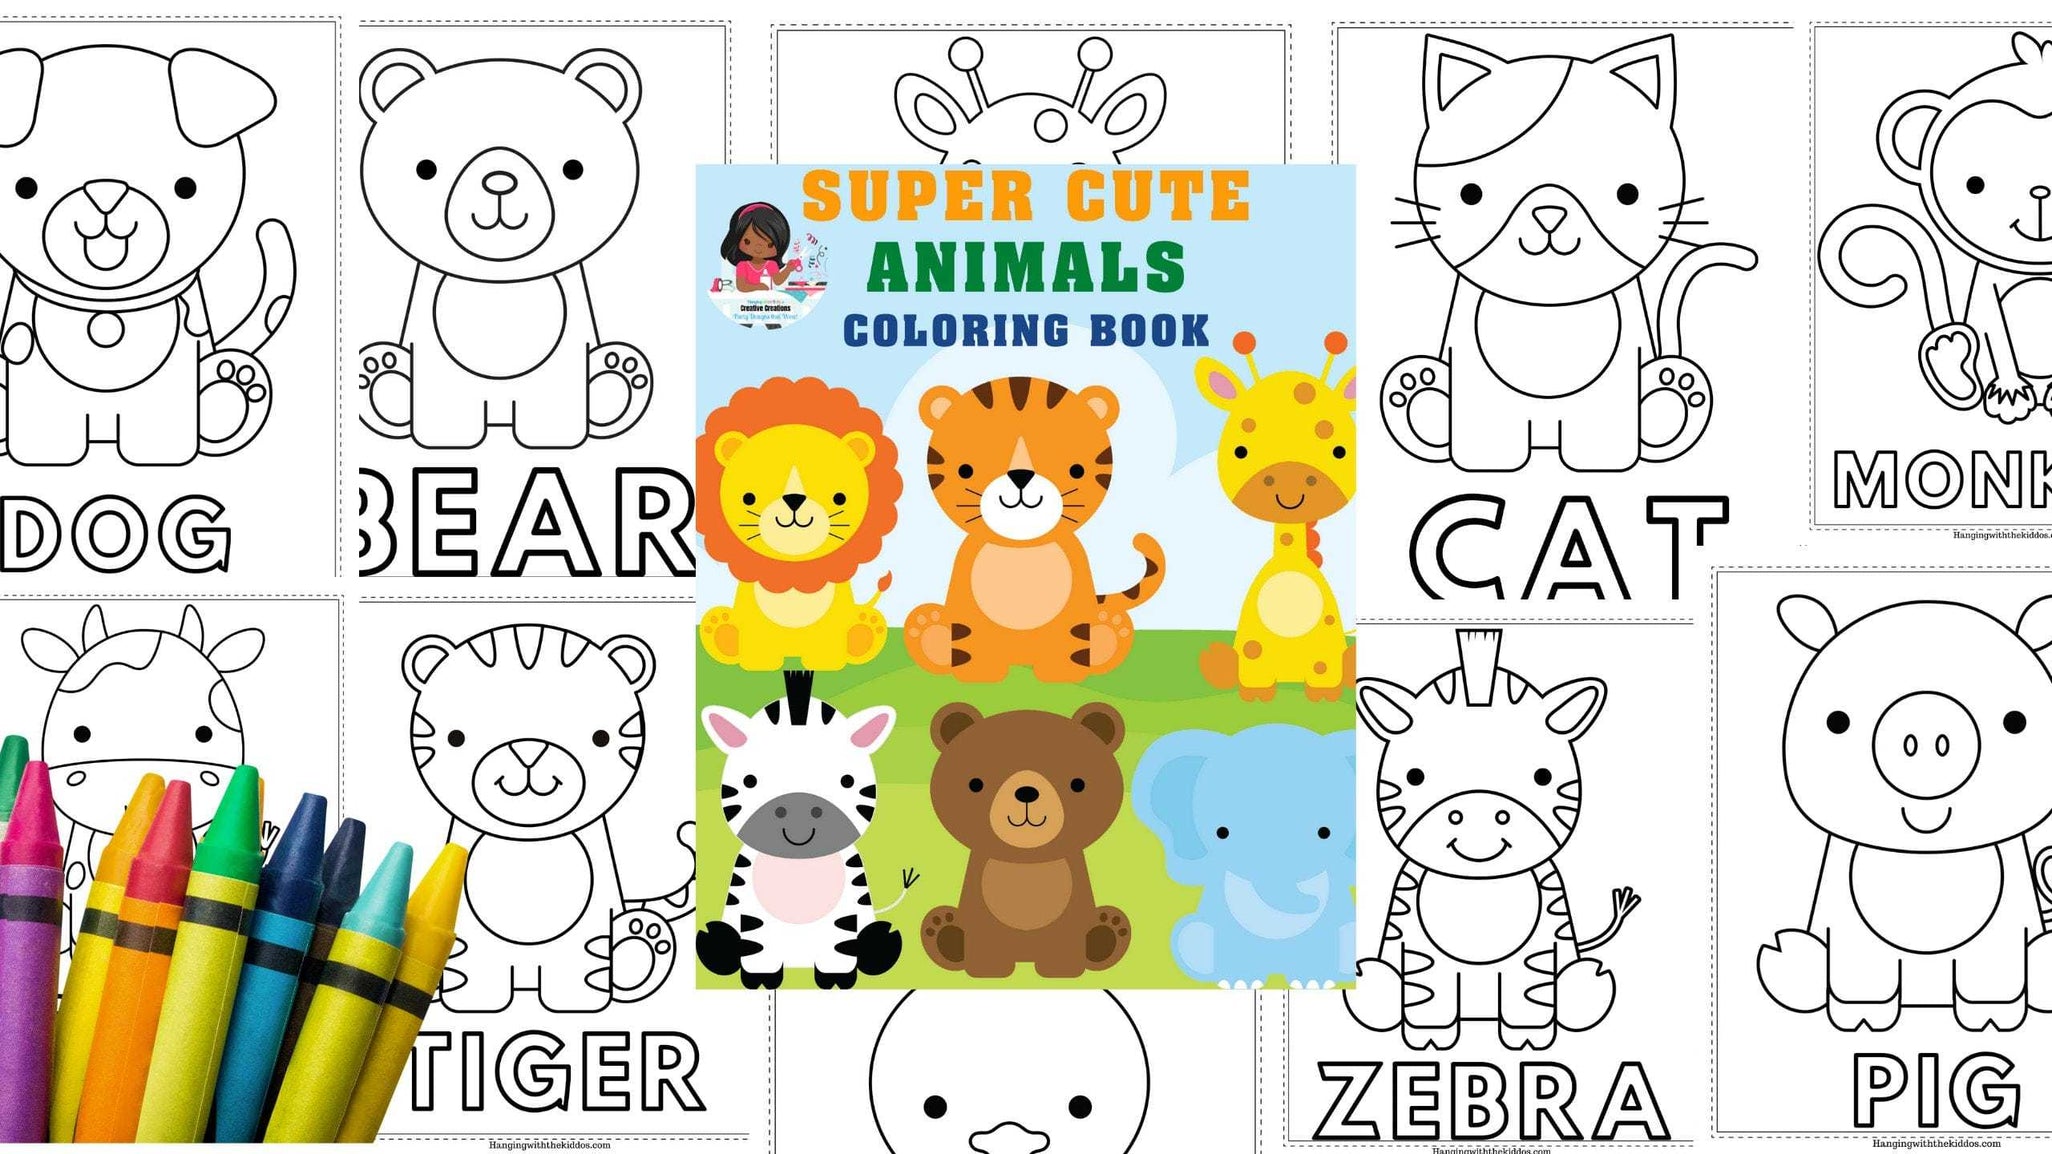 animals coloring book printable colouring book for kids and adults zoo animal farm animals hanging with the kiddos